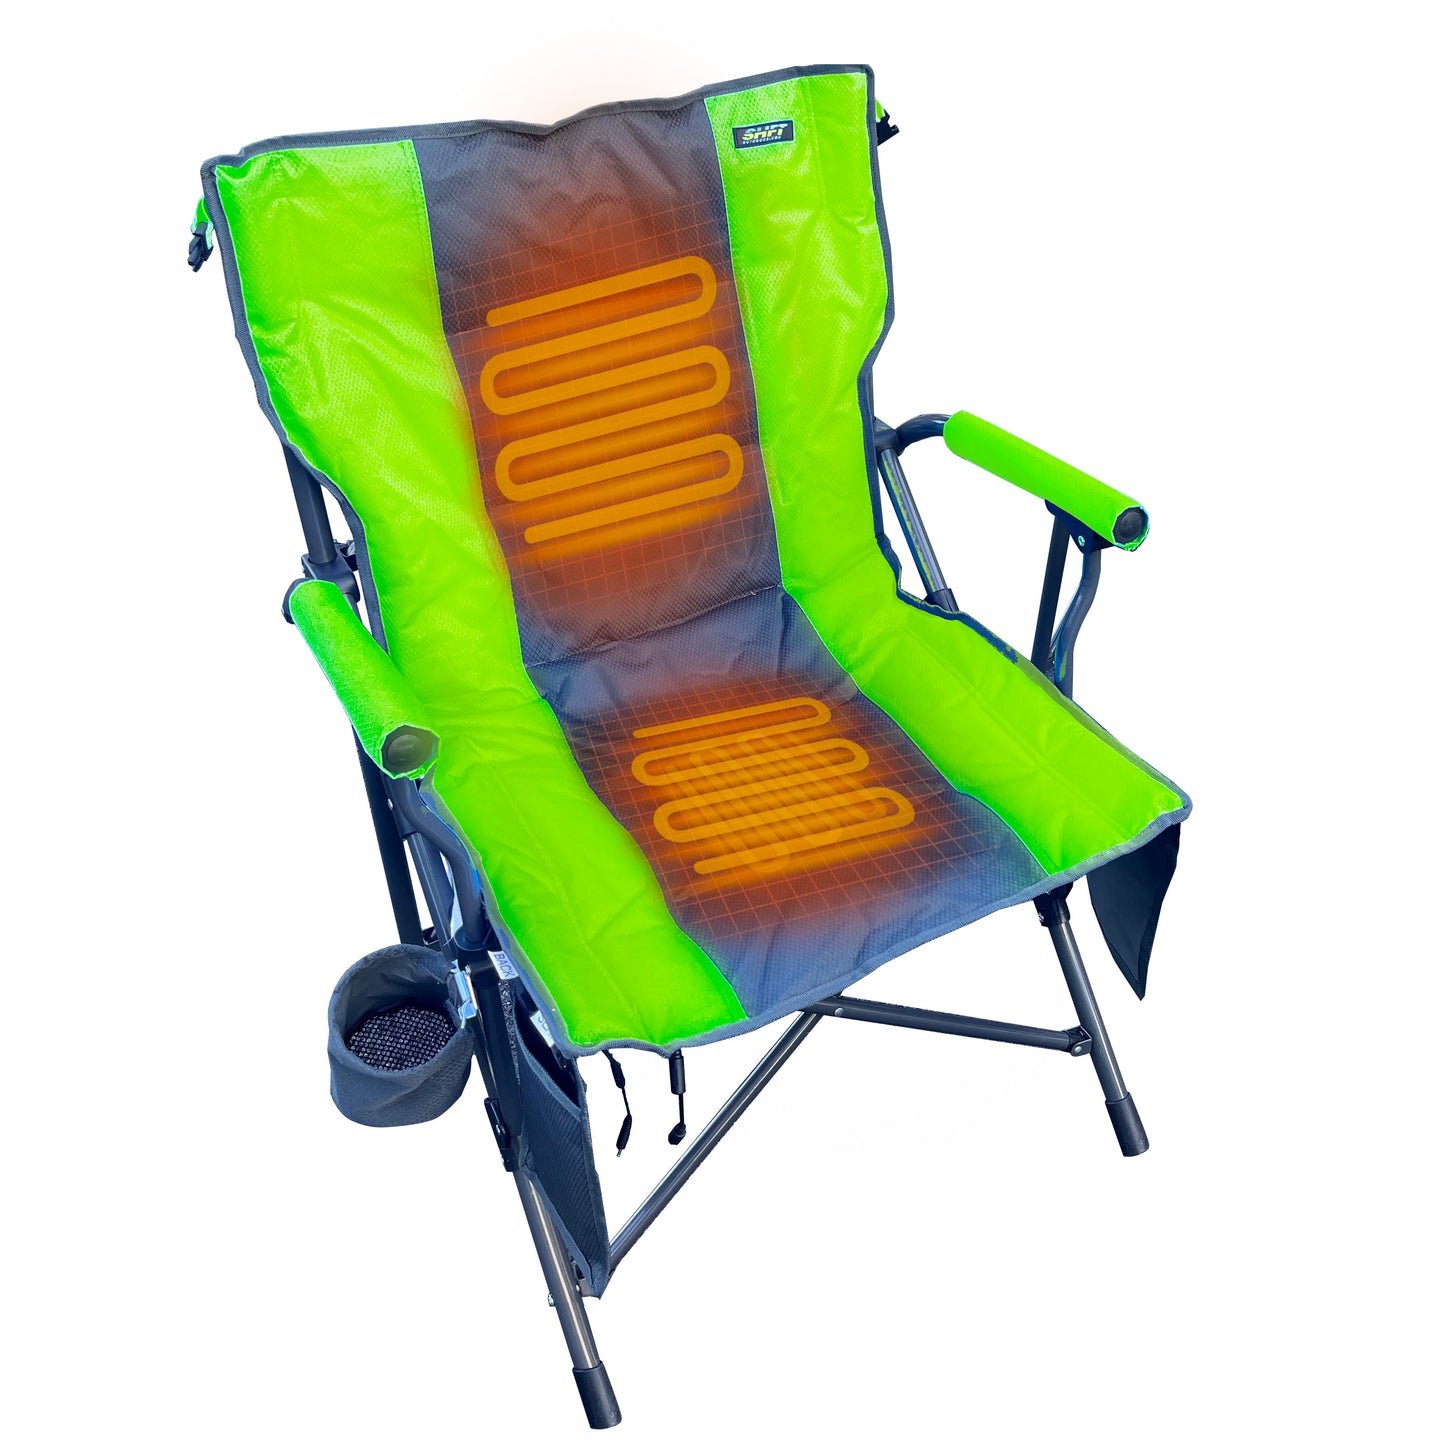 SHFT Heated Chair Powered by Energizer